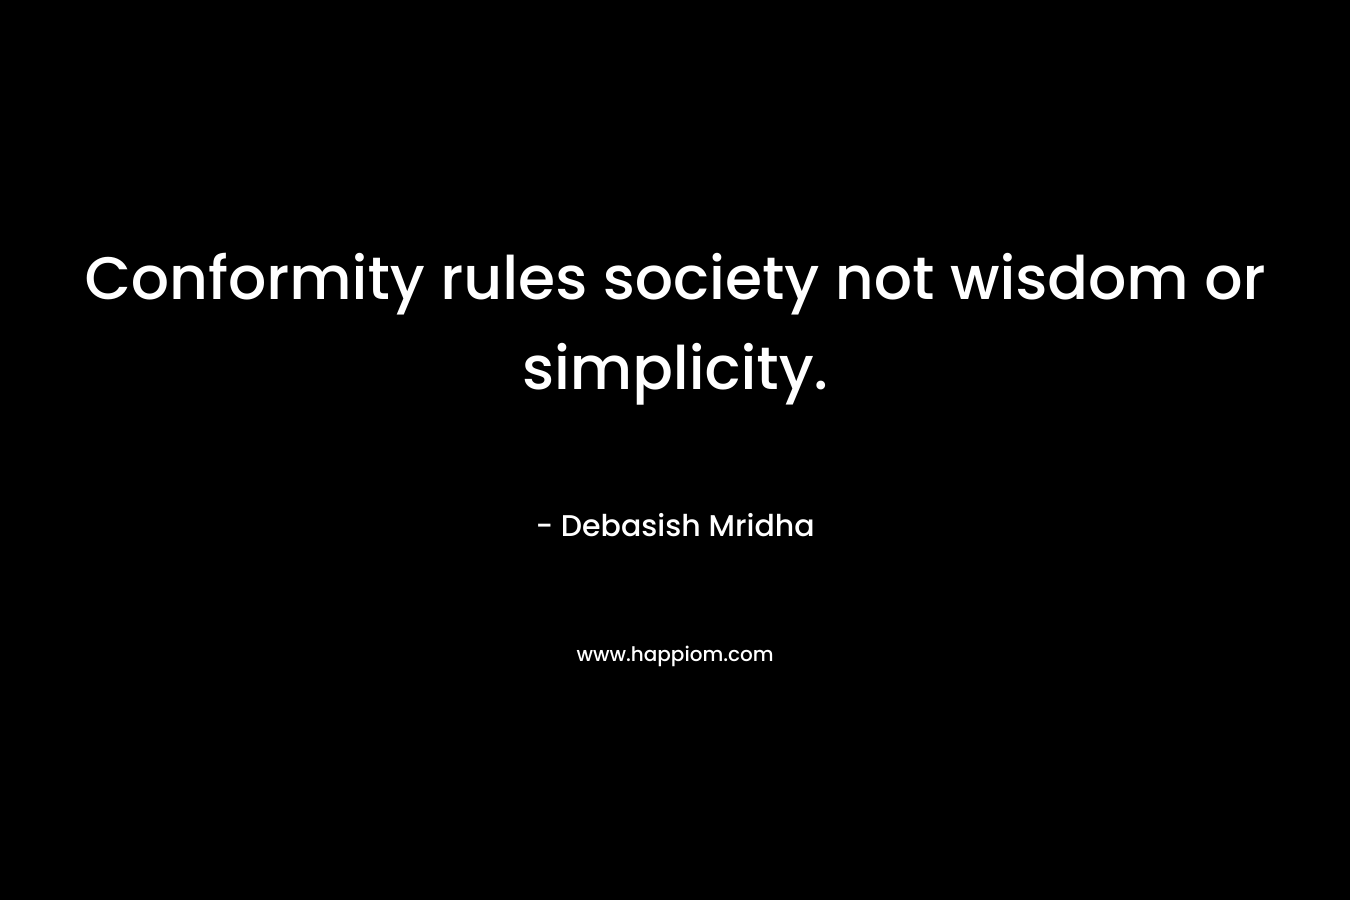 Conformity rules society not wisdom or simplicity.